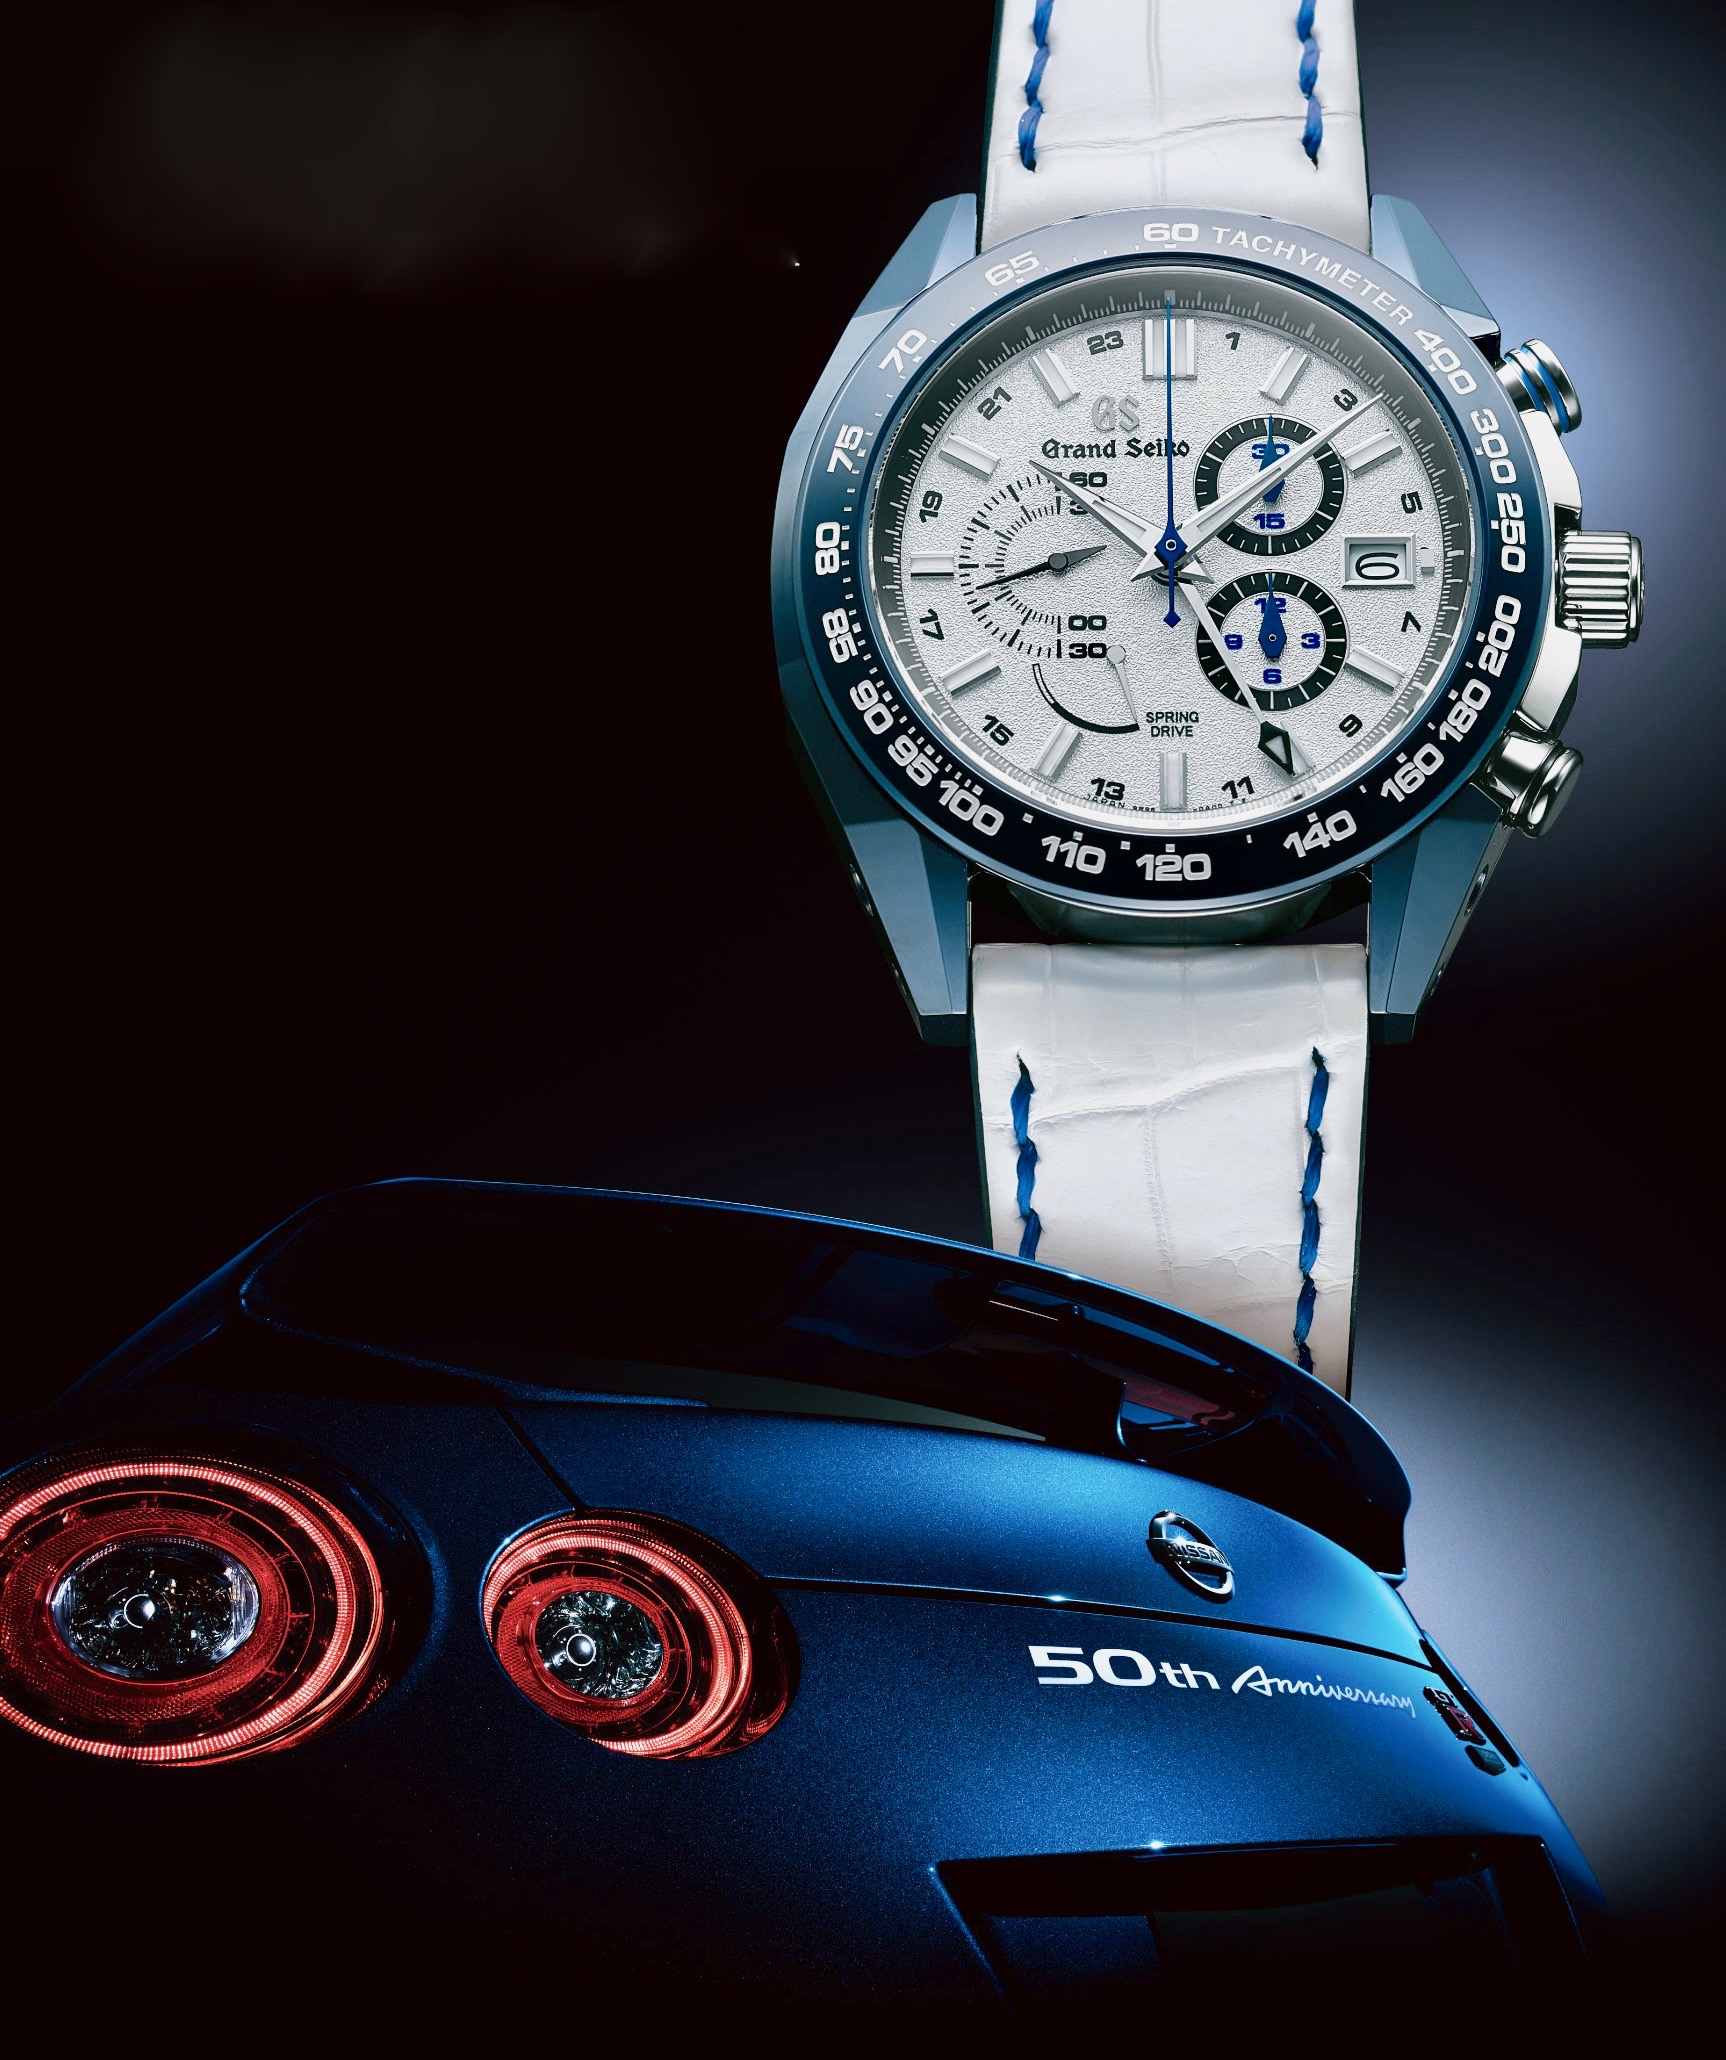 Nissan GT-R, Limited-edition watch celebrates 50 years of Nissan GT-R, ClassicCars.com Journal